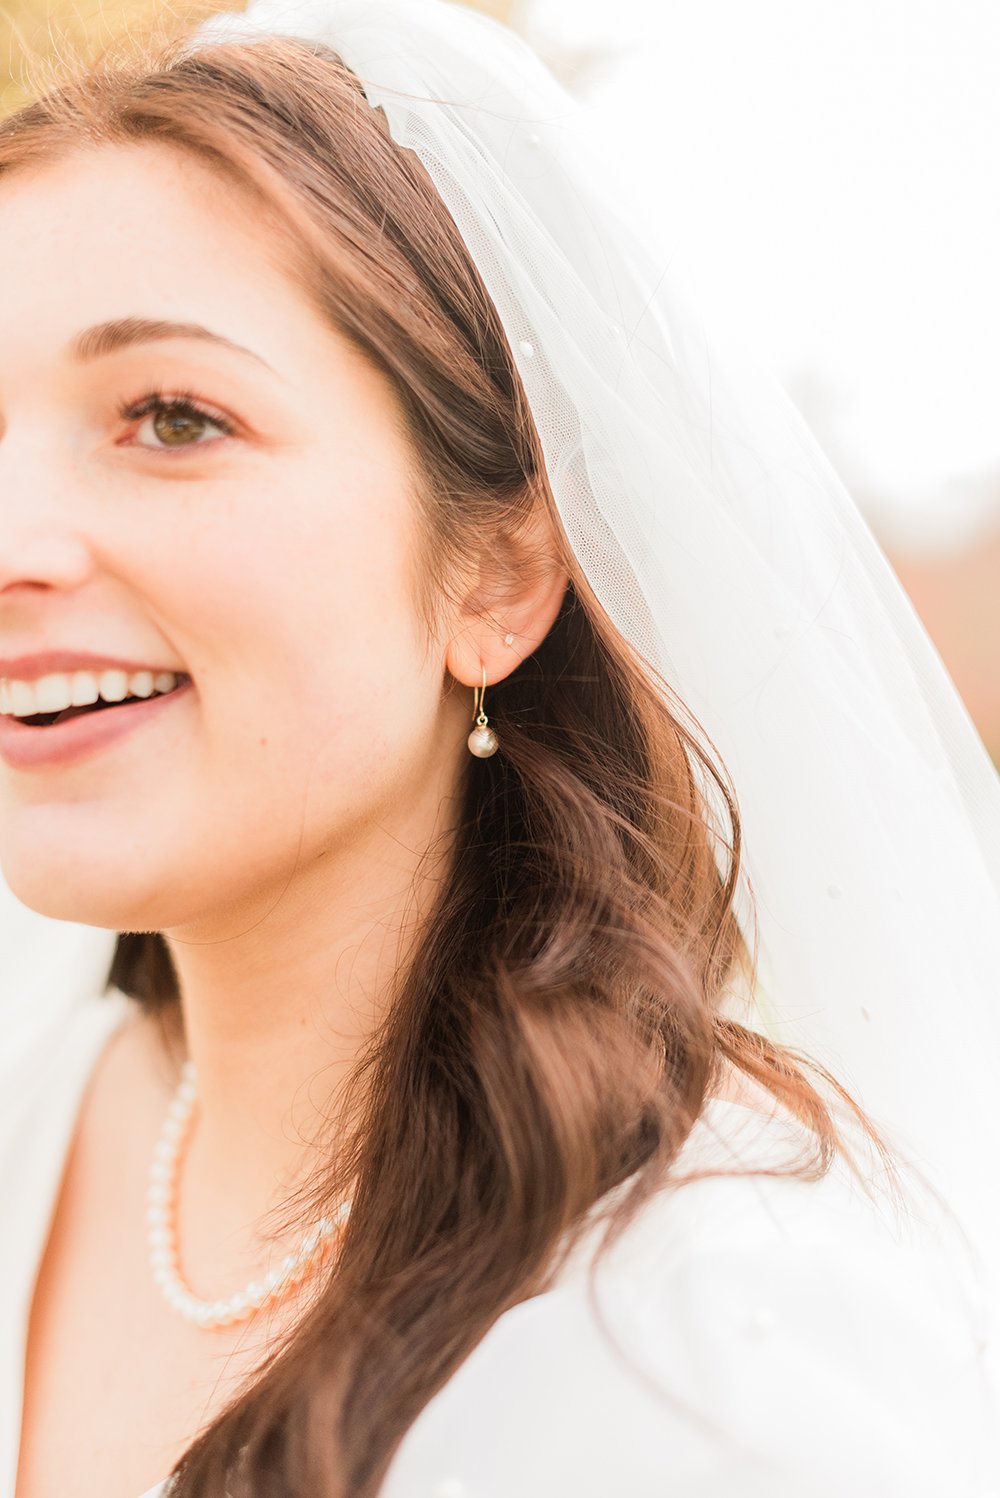  The focus is on the bride's earrings, hair, and veil in this wedding day photo taken by wedding photographer, Jacquie Erickson. Bridal photos wedding photographer detail shot Sharpsburg Roswell #weddingphotographer #ldsweddings #atlantatemple #jacqu